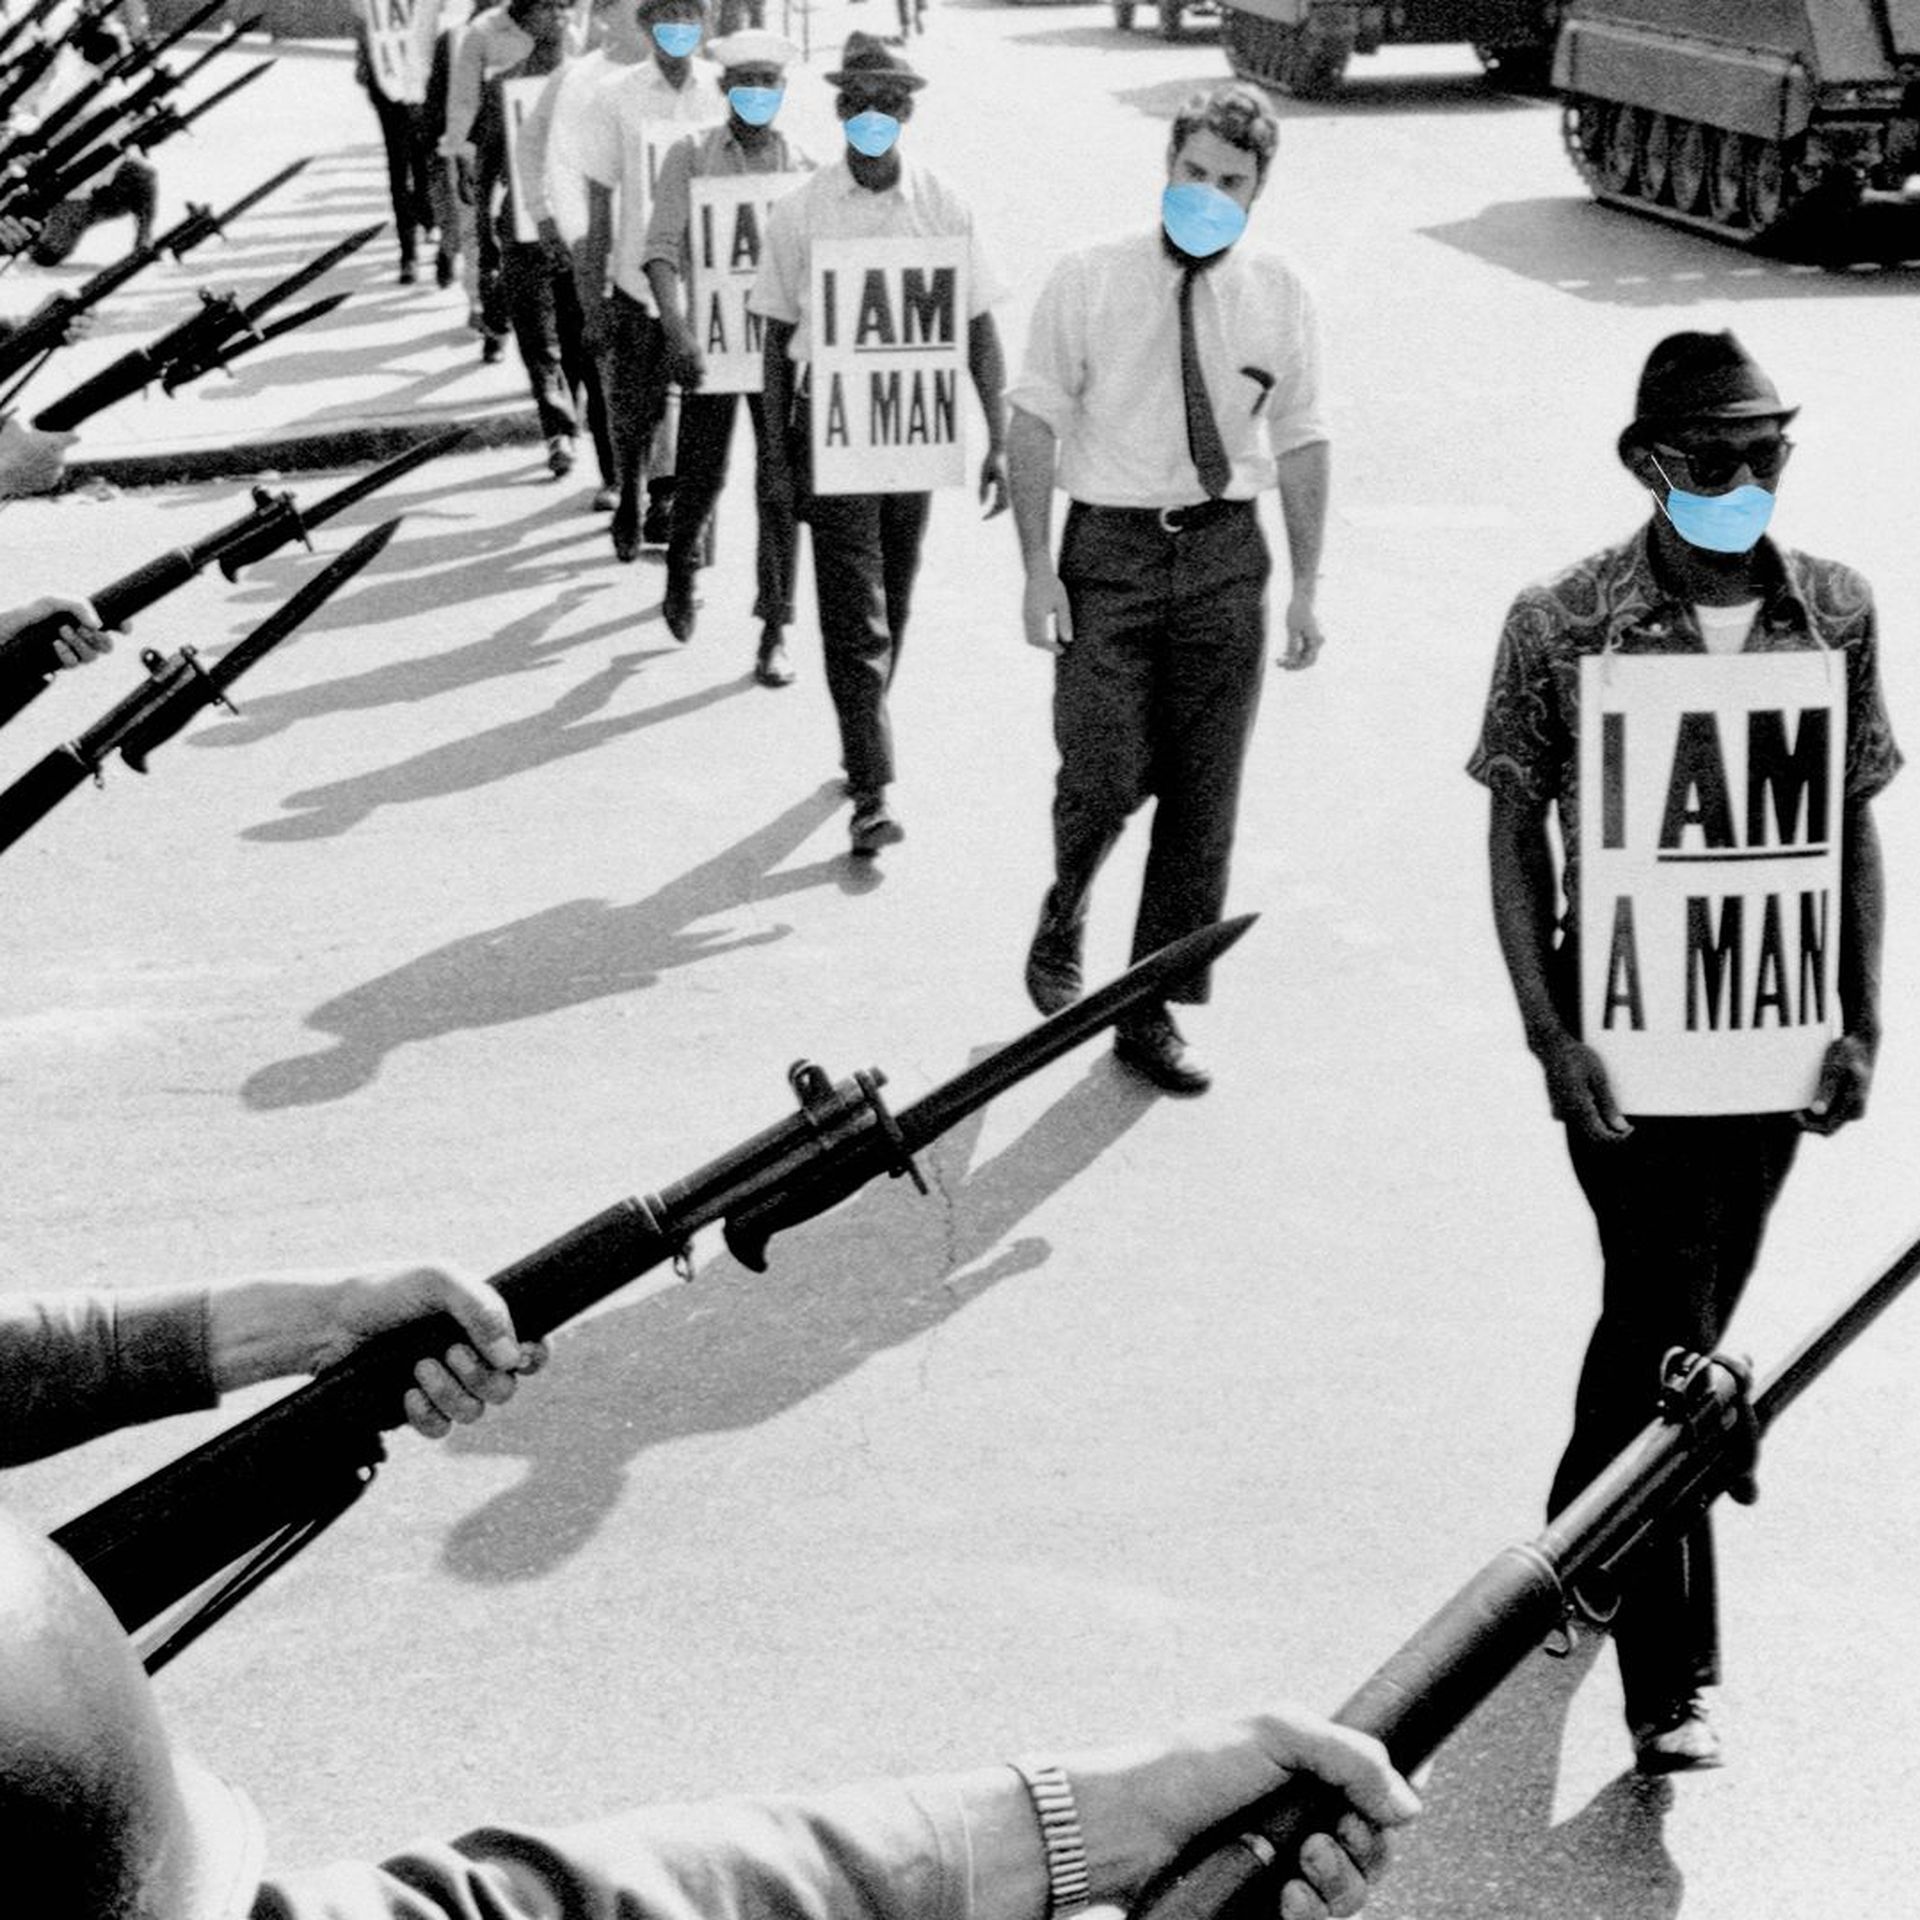 Illustration of Civil Rights marchers with "I Am A Man" signs wearing surgical masks